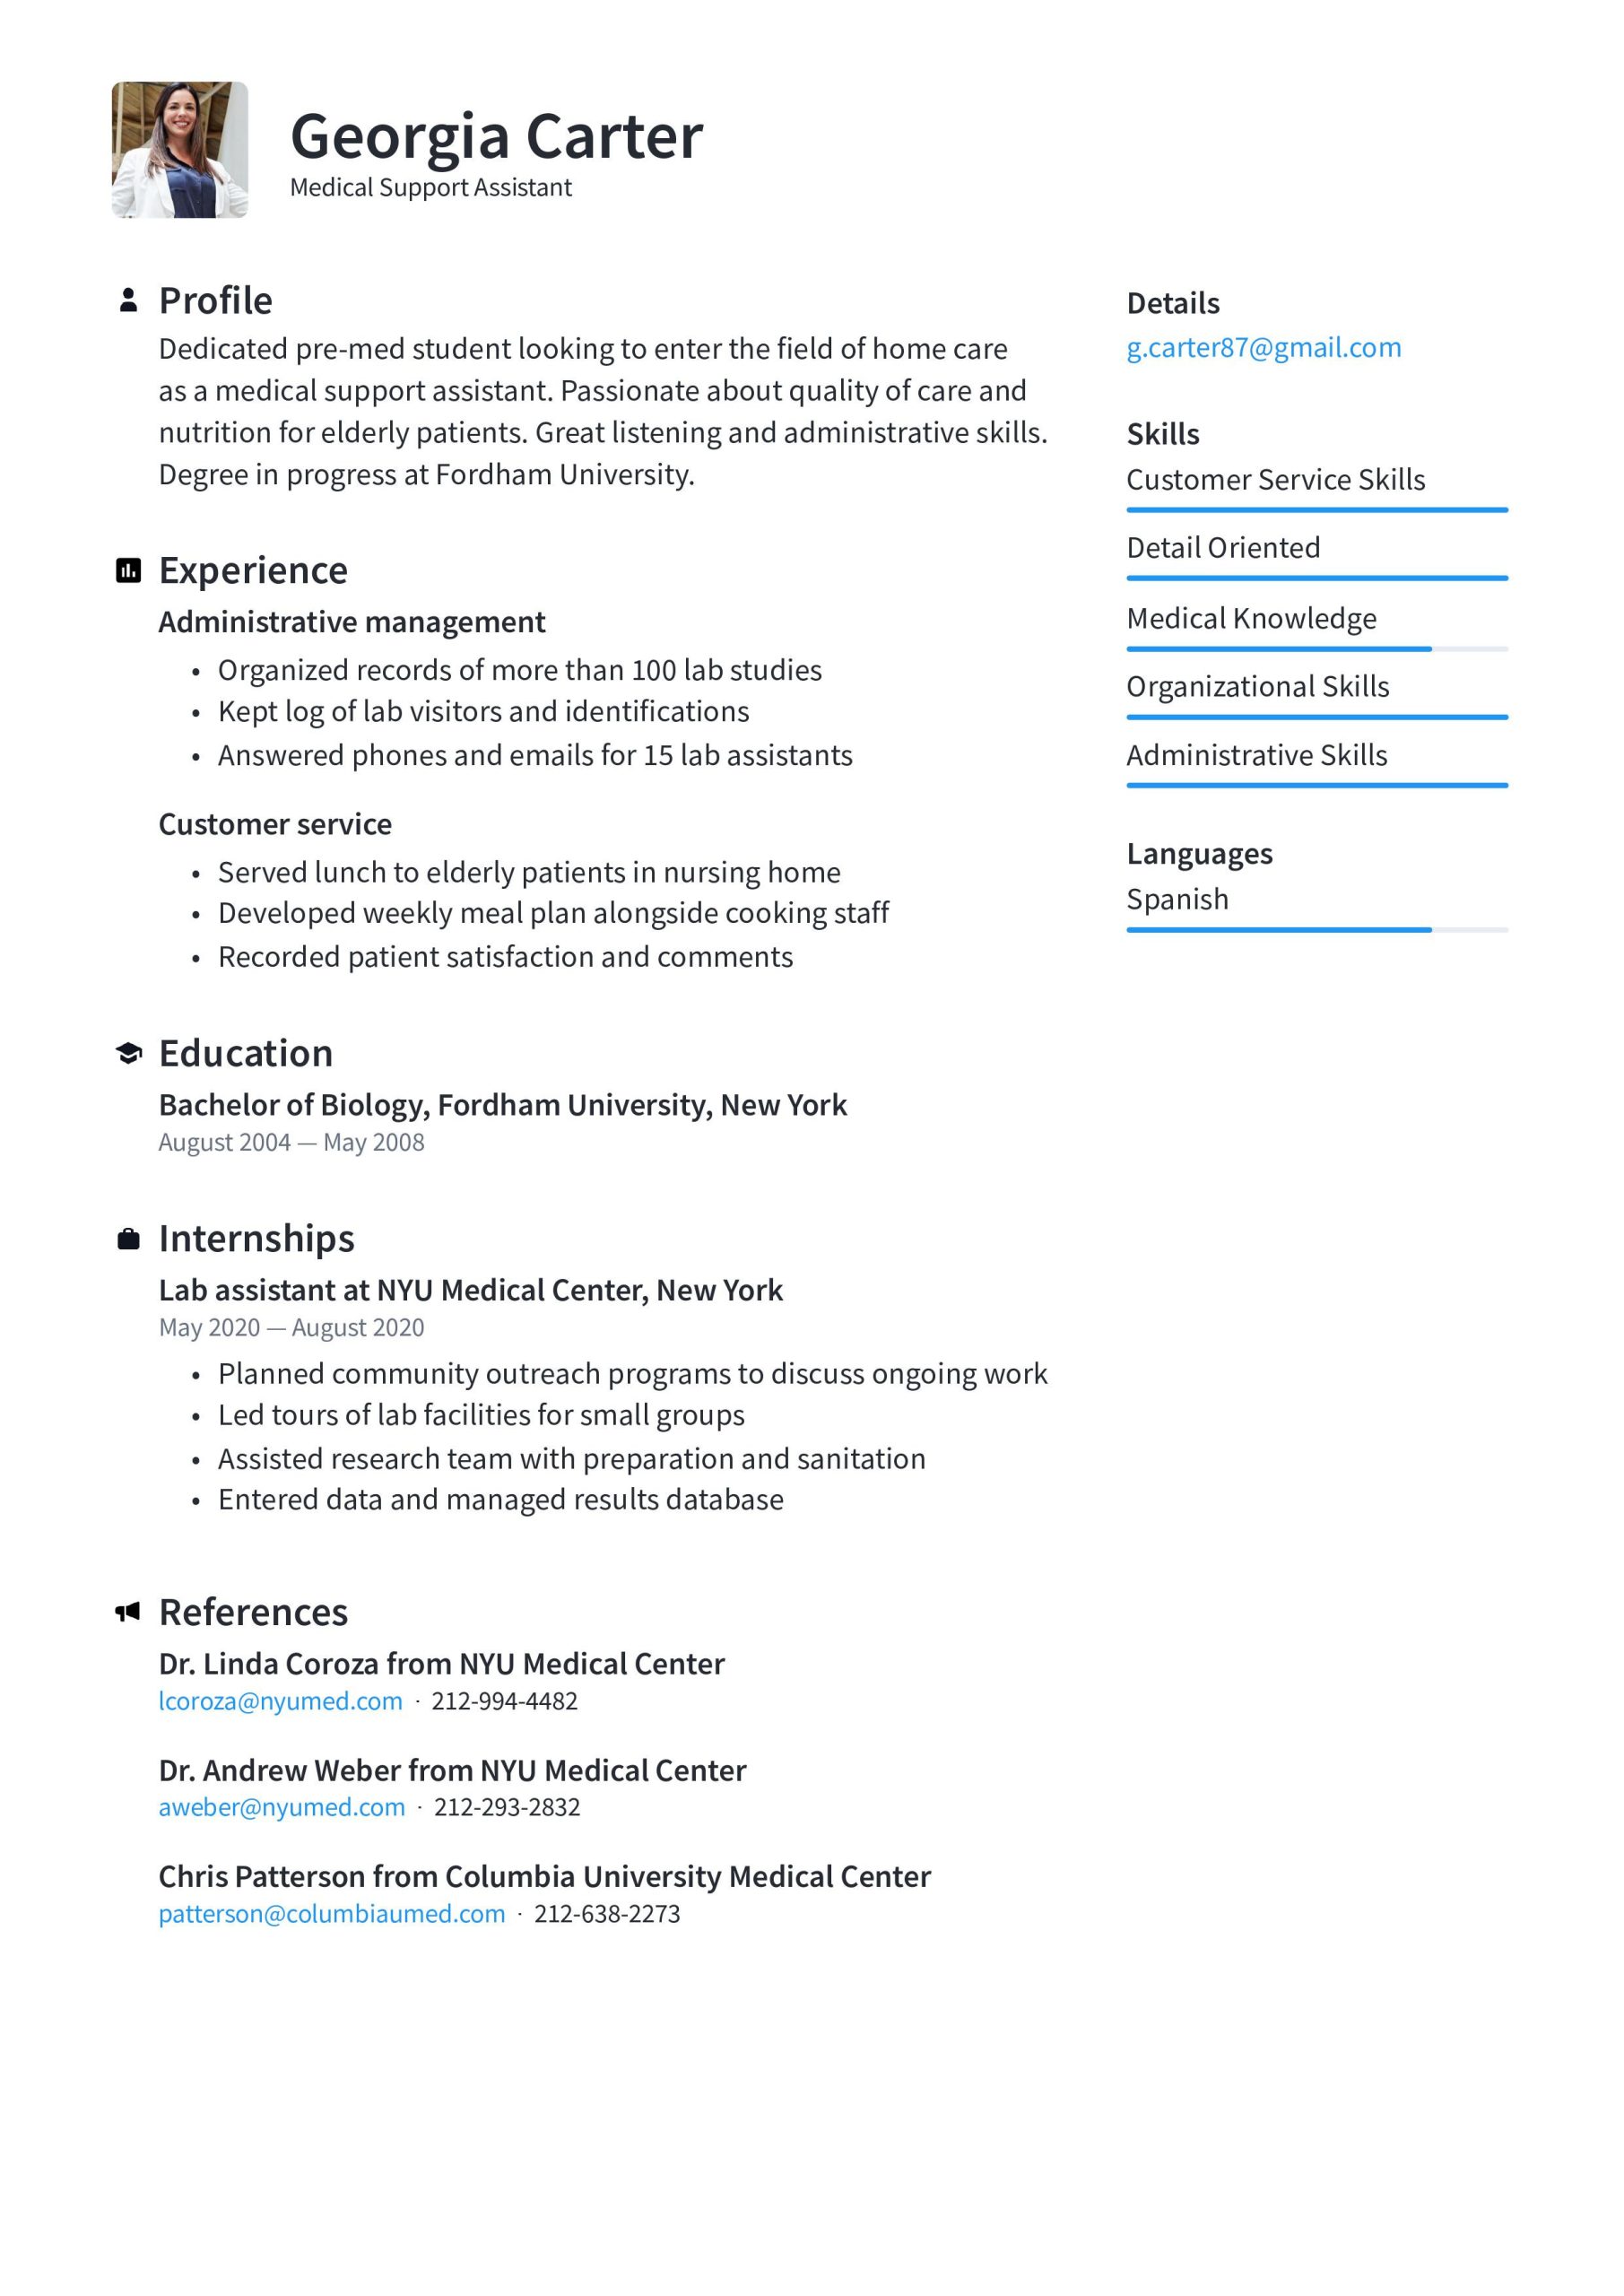 Functional Resume Samples with No Job Experience Functional Resume format: Examples, Tips, & Free Templates